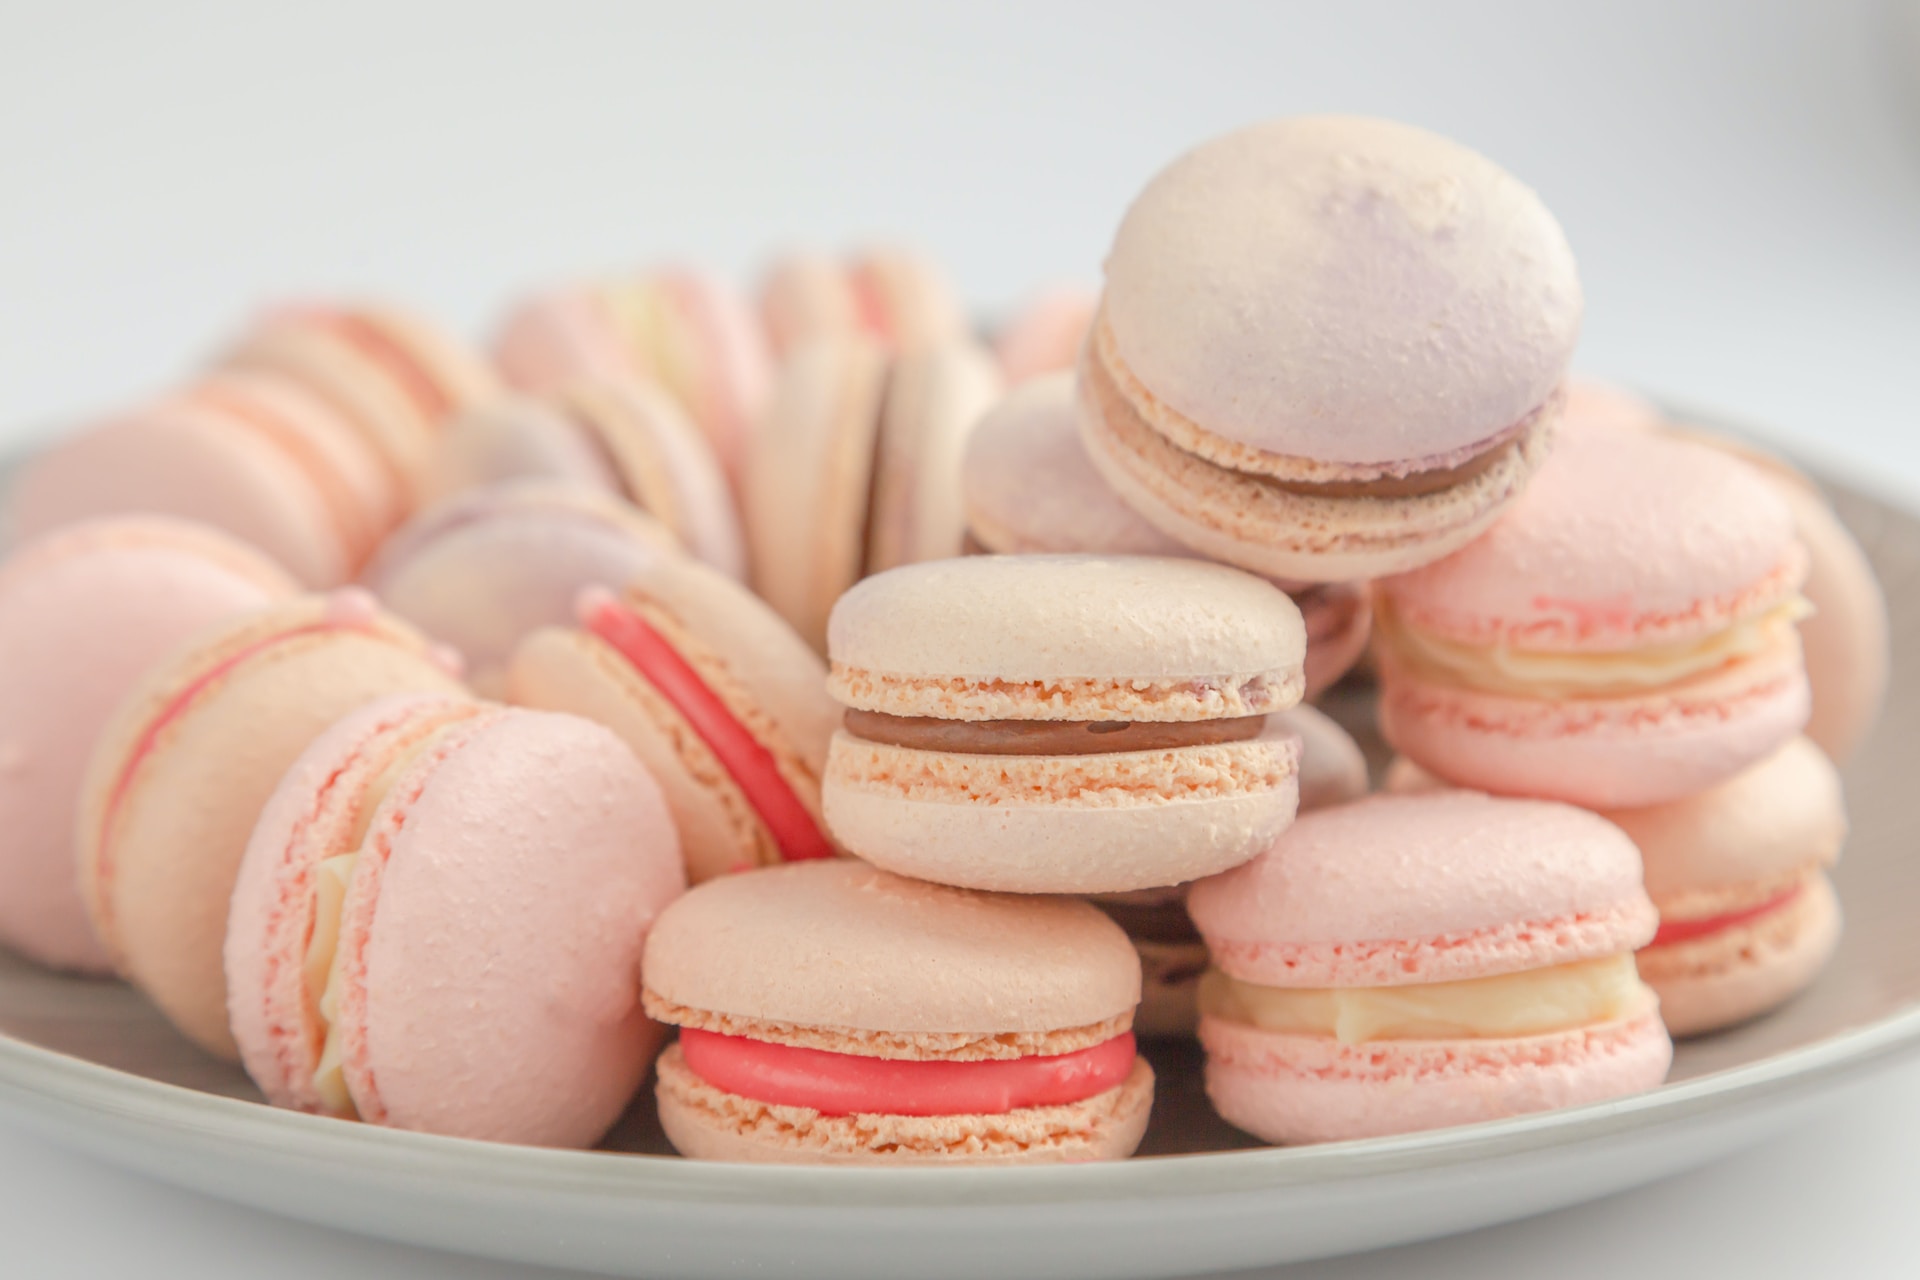 Top 10 Tasty Facts about Macaroons You Should Enjoy Today